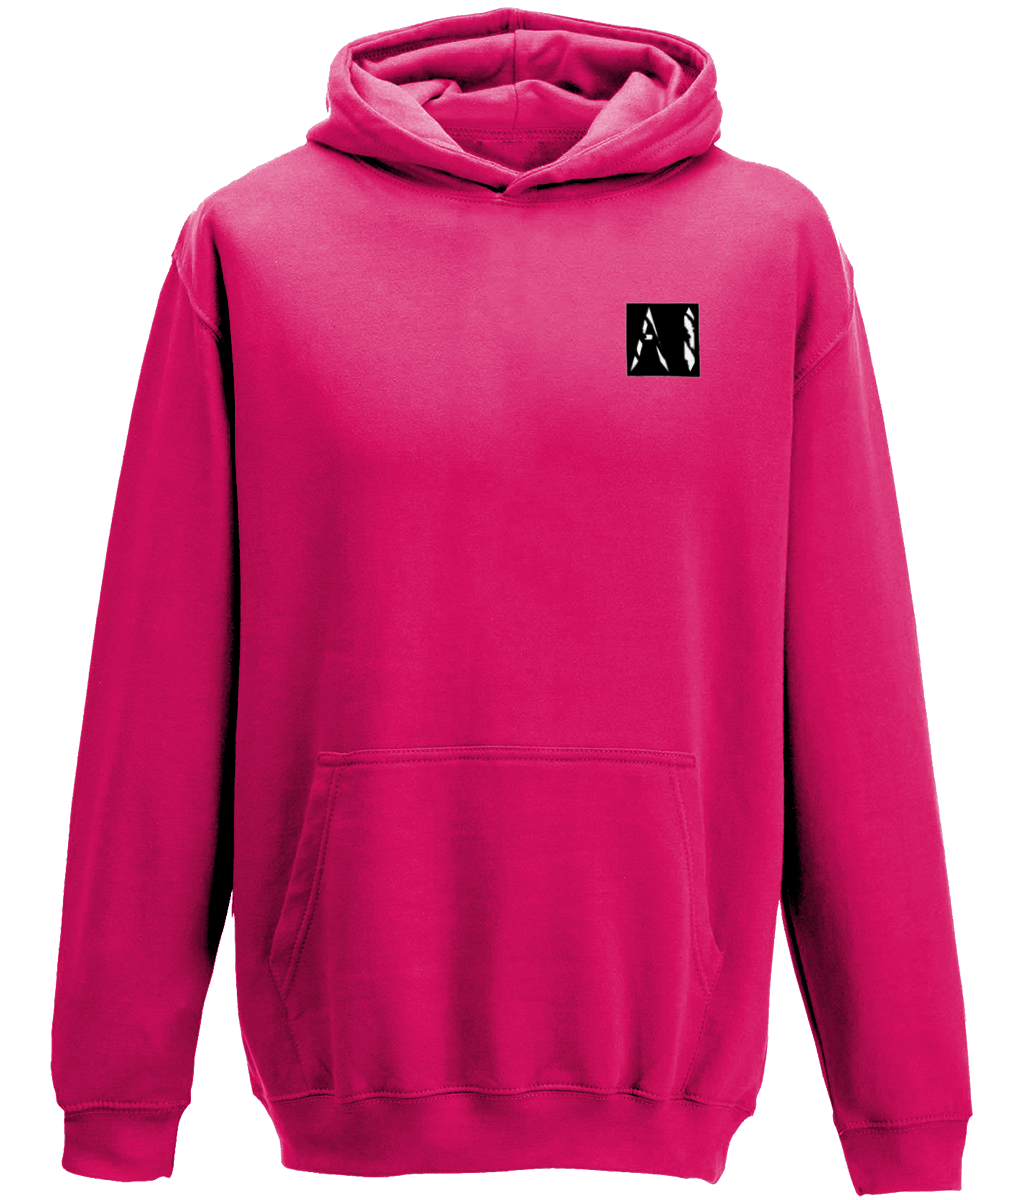 Animal Instinct Signature Box Logo Purple megenta Hoodie with white AI logo within a black box located on the left chest